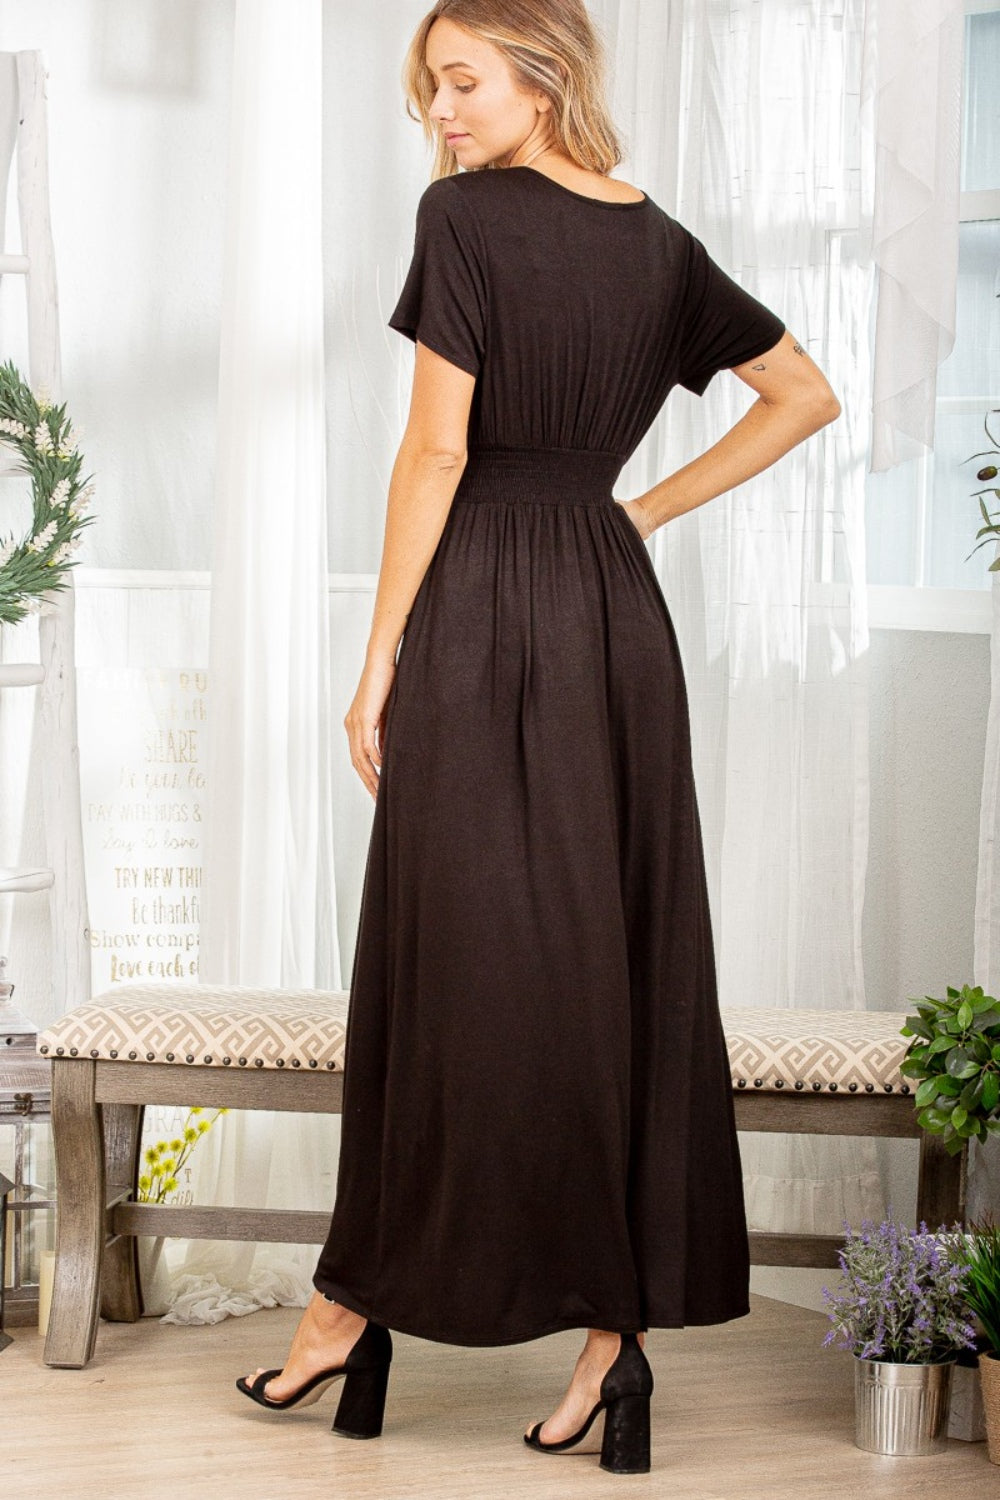 Brown Short Sleeve Casual Maxi Dress with Pockets New Women's Fashion Lose Fit Long Dress